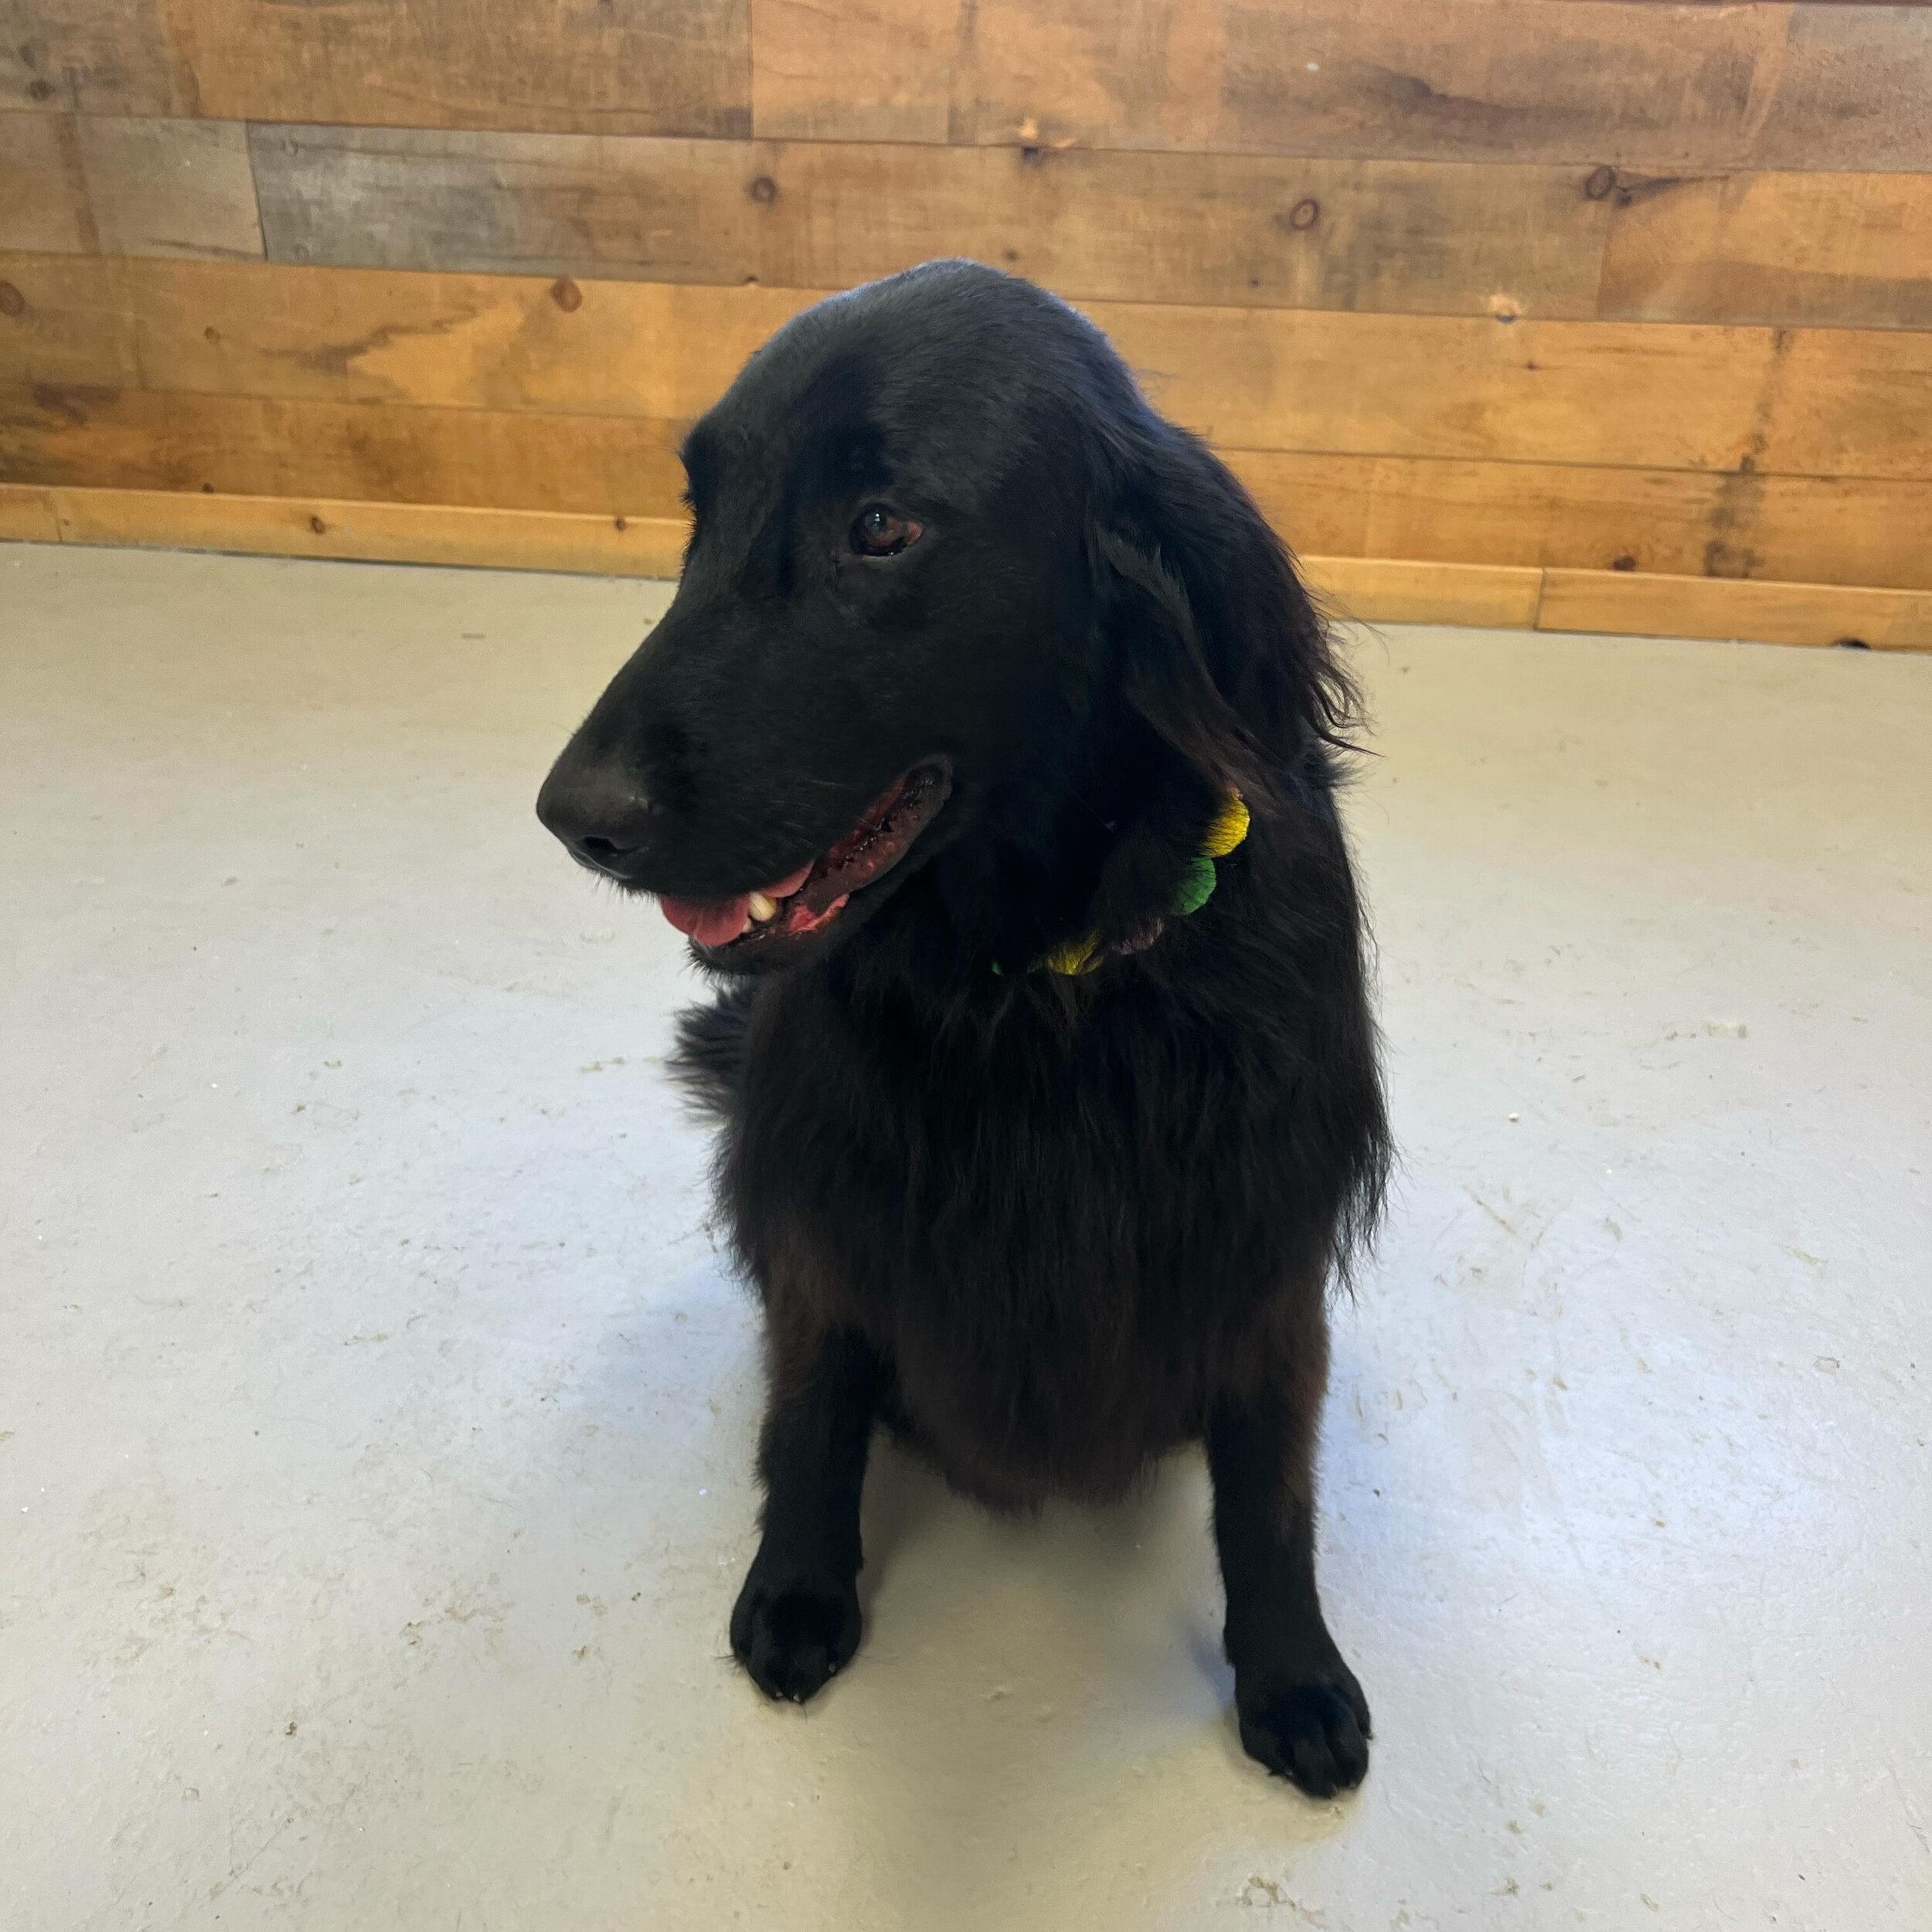 Sweet Gemma came in for a groom this afternoon! Always a treat for us to have interesting breeds in the shop. Gemma is a flat coat retriever (and a very pretty one if we do say so ourselves!)